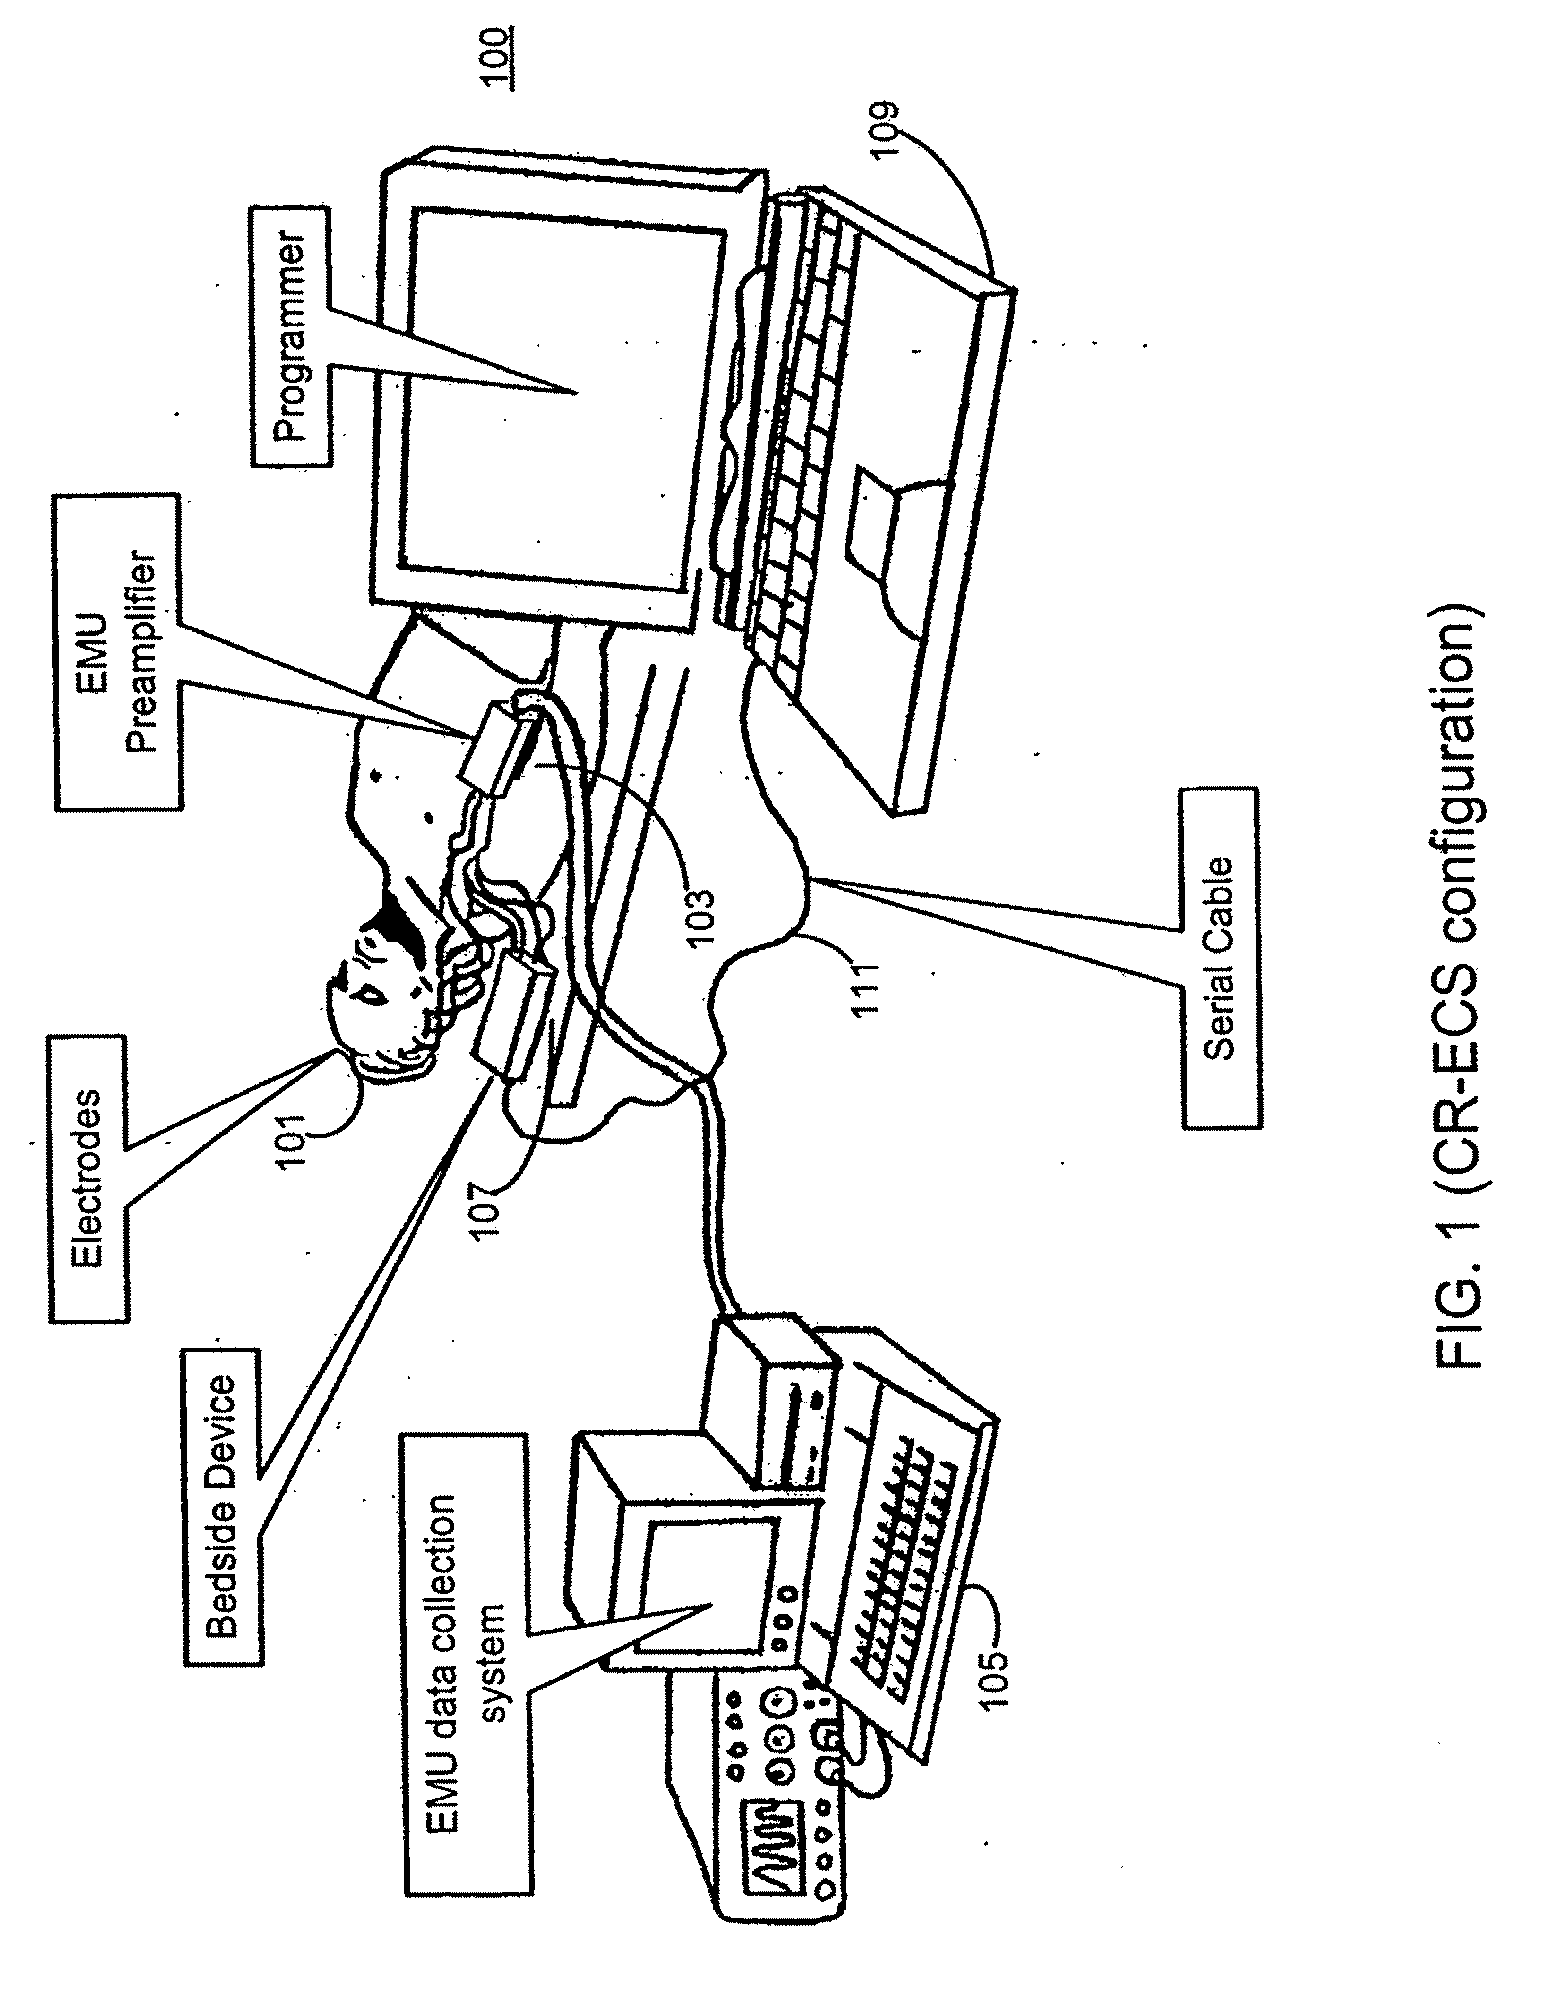 Phase Shifting of Neurological Signals in a Medical Device System